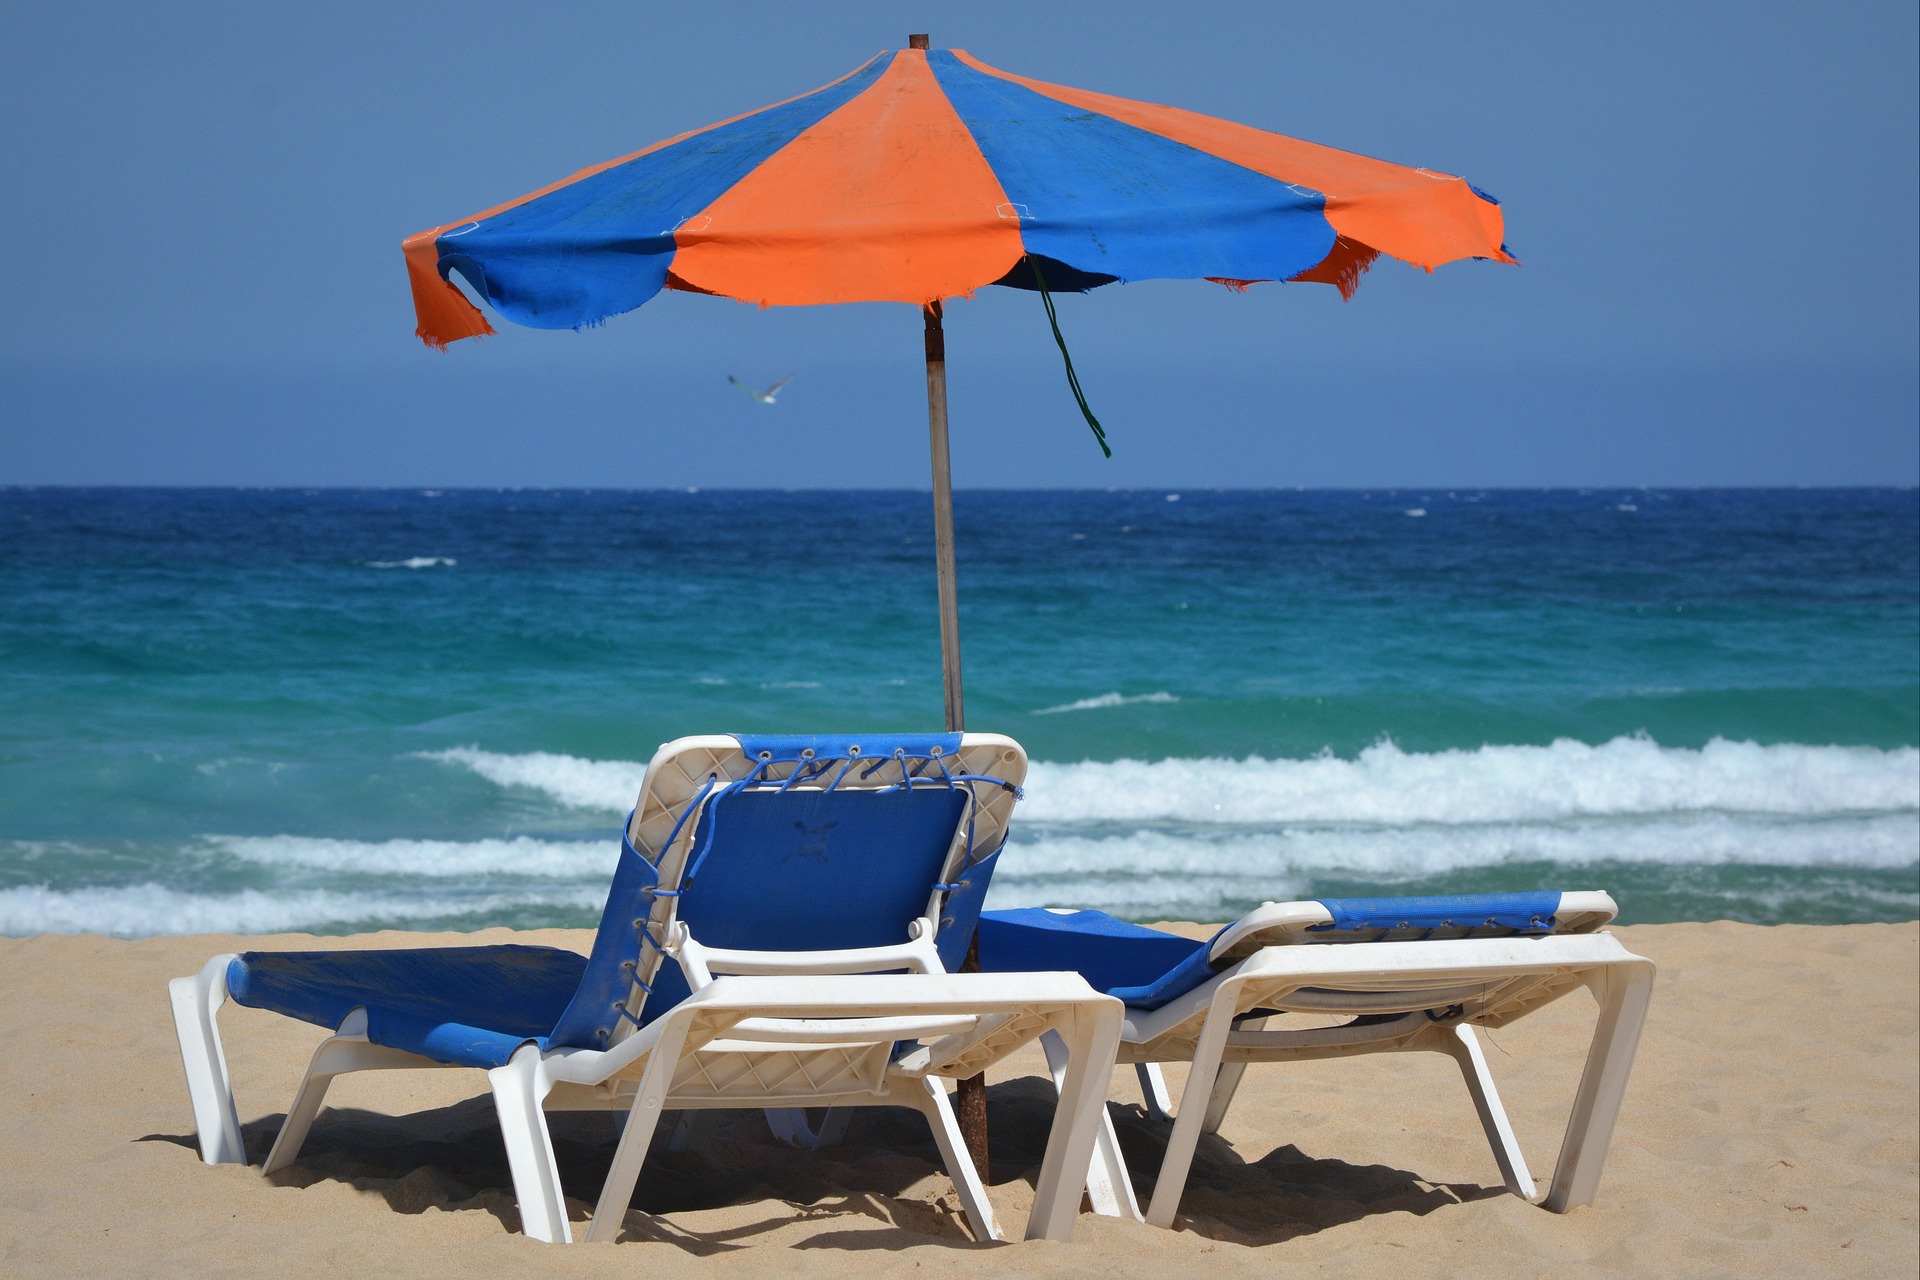 Umbrellas and deck chairs at the beach